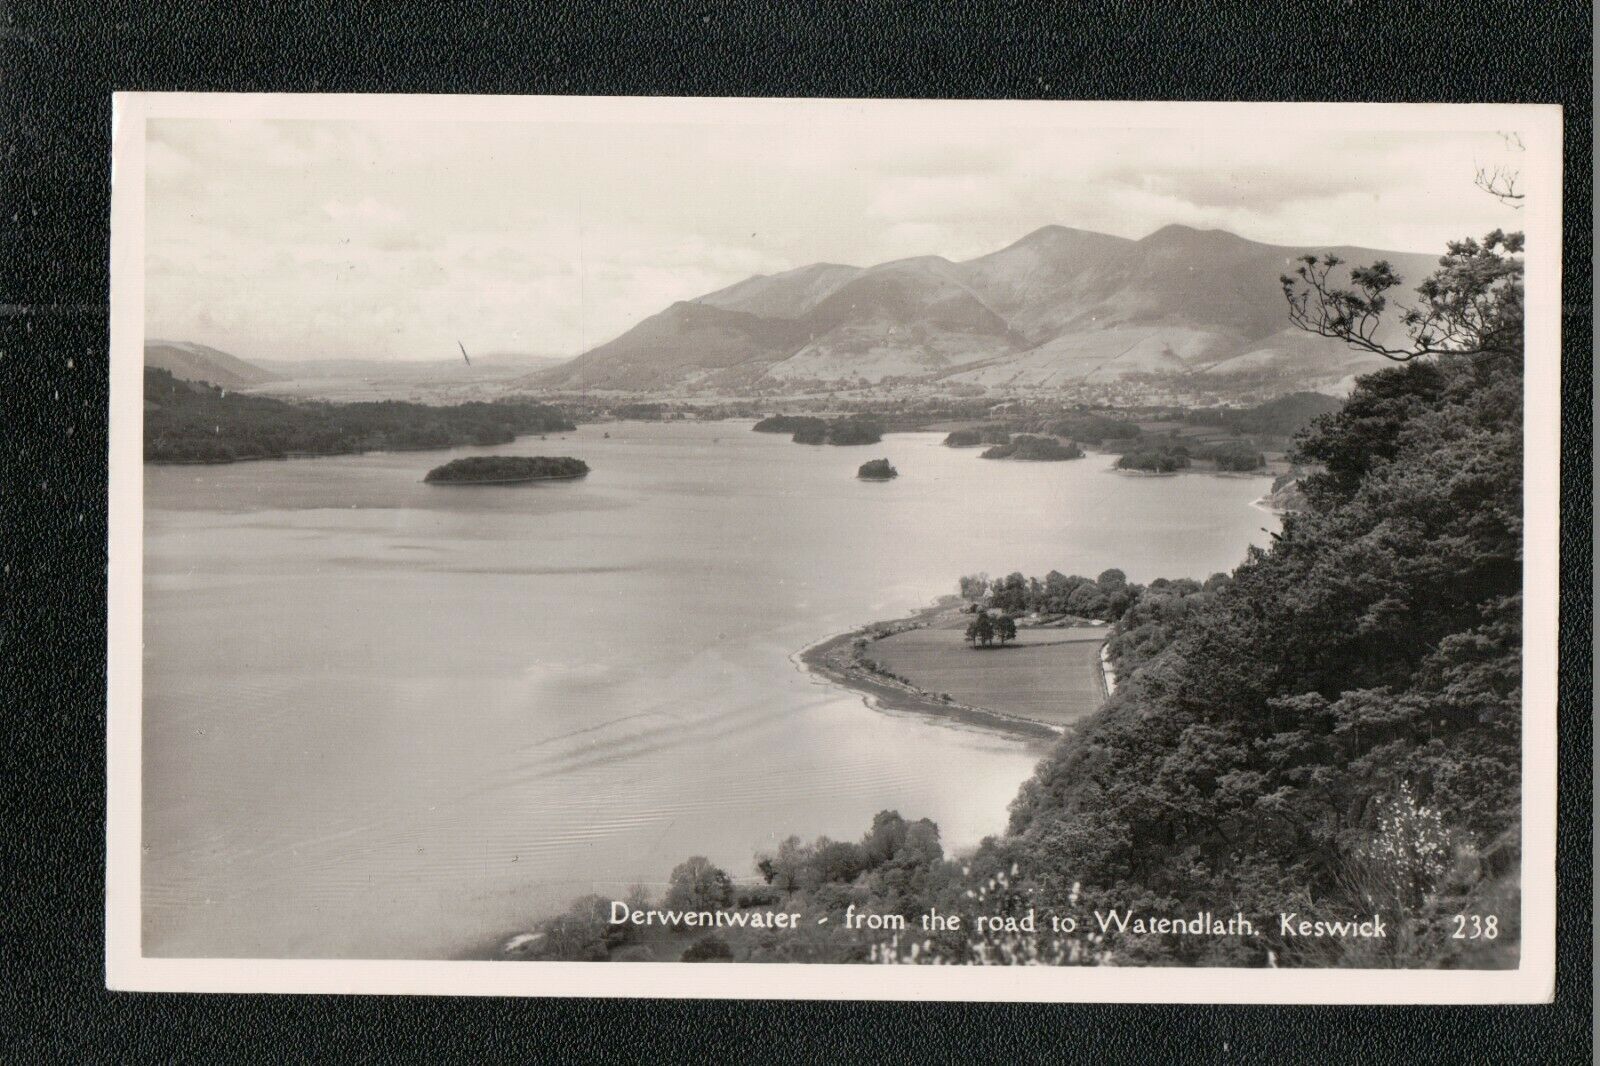 House Clearance - Derwentwater from the road To Watendlath Keswick 1959 RP Service